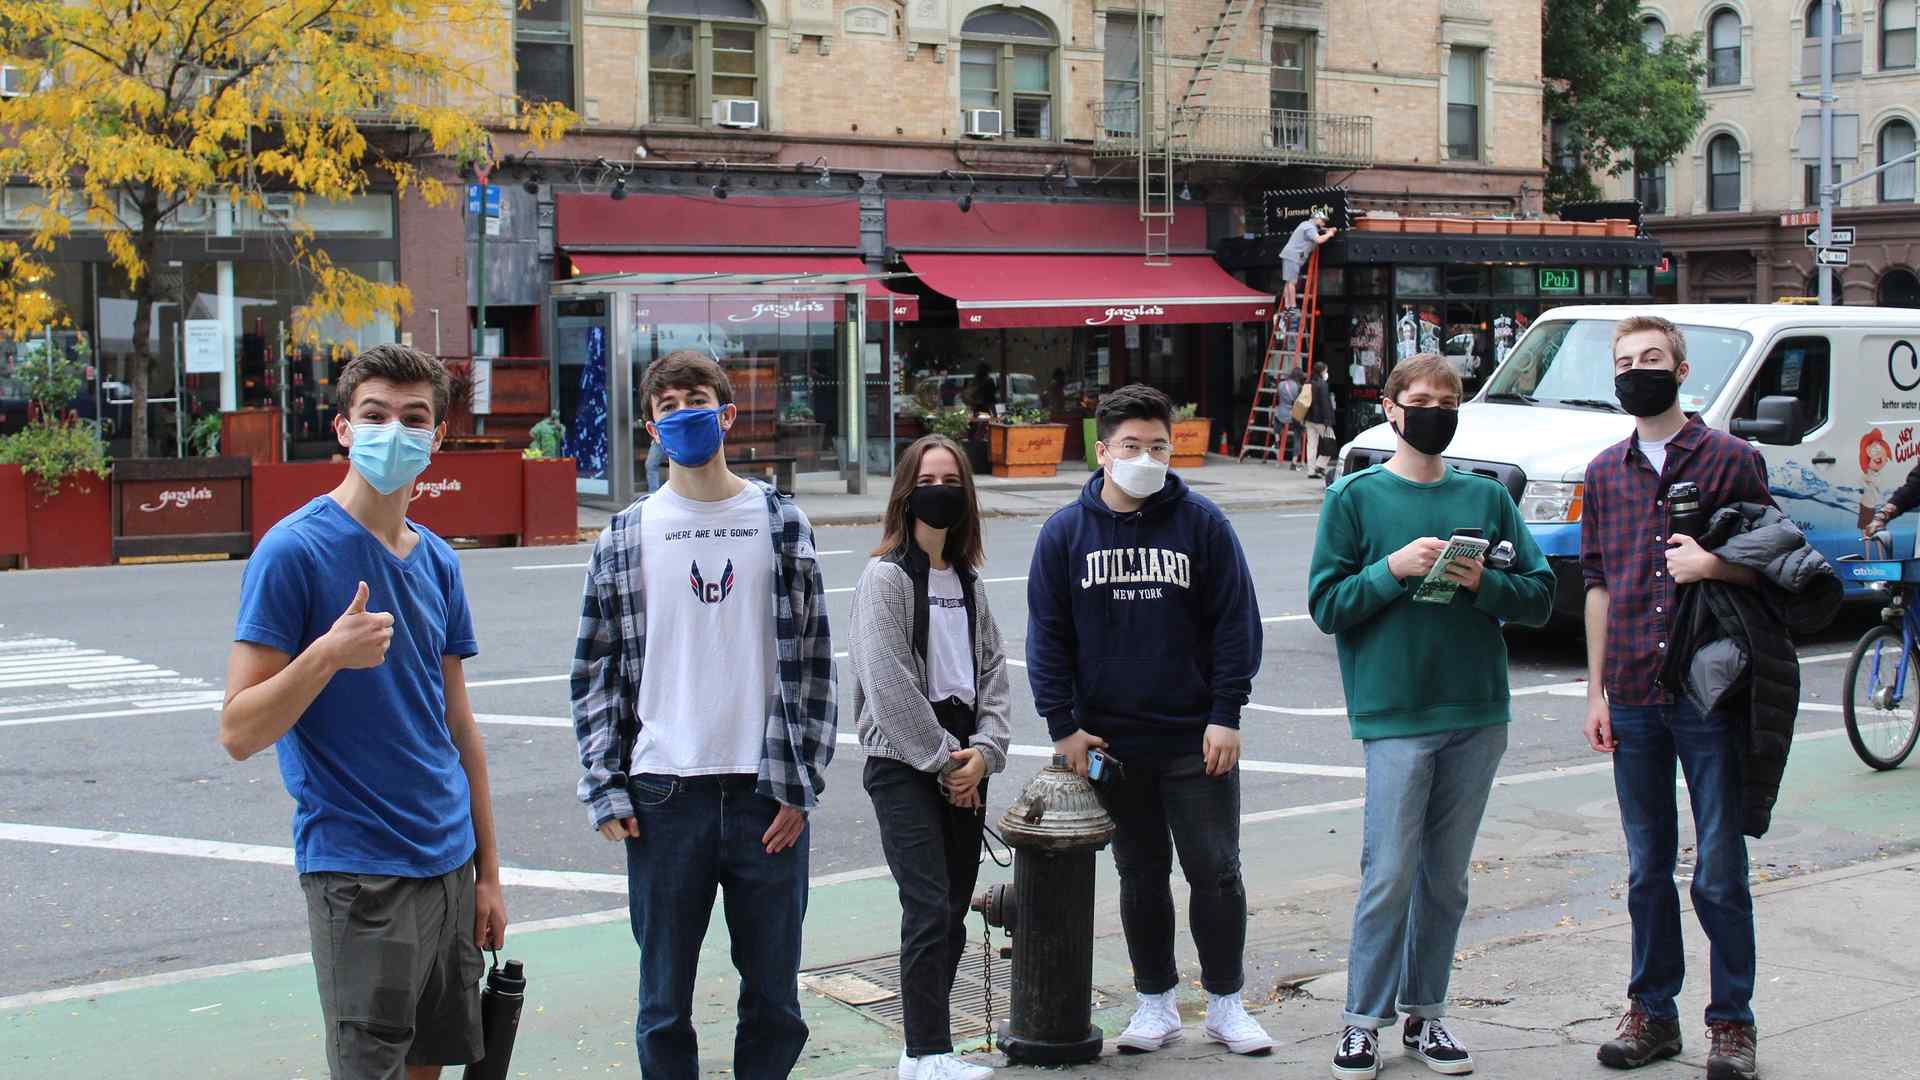 Six first-year students, each wearing a face mask, pose casually near a fire hydrant on a New York City street 